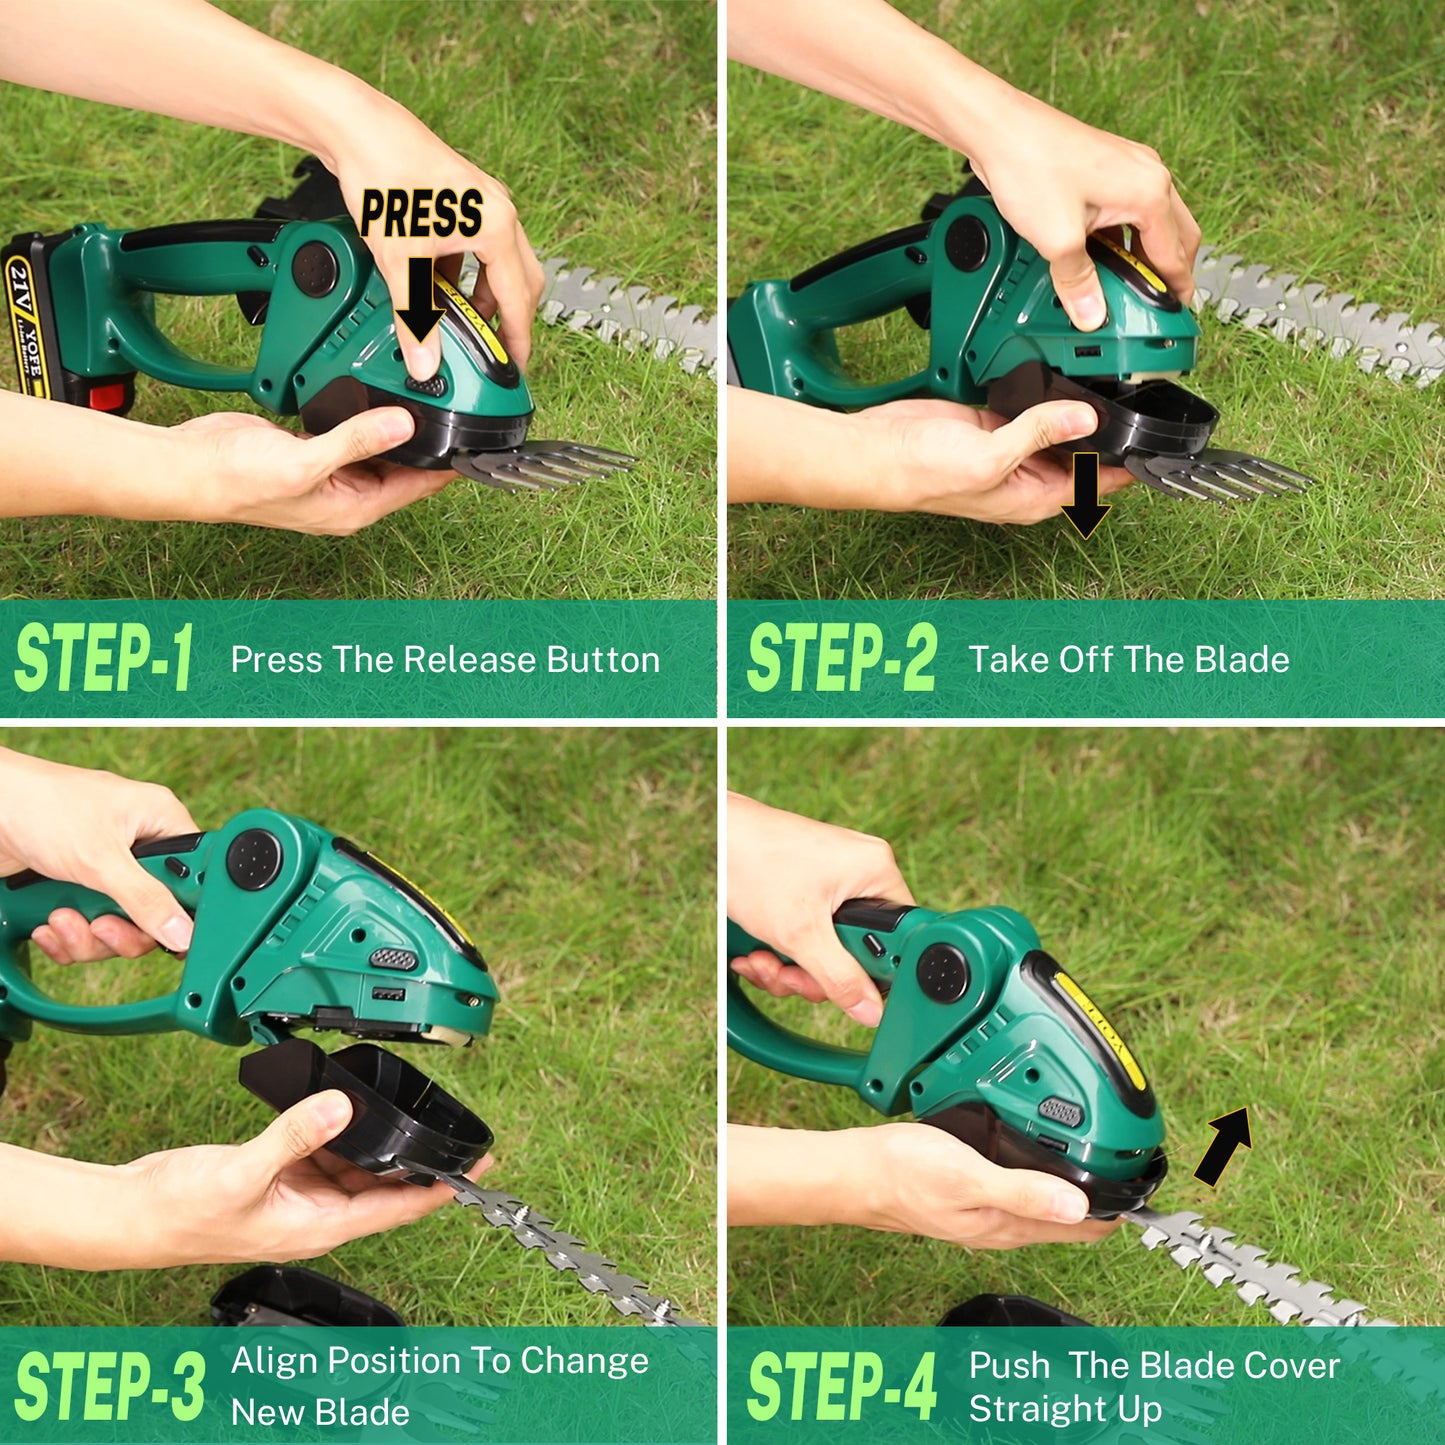 SYNGAR 2-in-1 Cordless Grass Shear & Shrubbery Trimmer, 21V Electric Handheld Hedge Trimmer Grass Cutter, with Rechargeable Battery and Charger, for Yard Lawn Garden Care, Y012